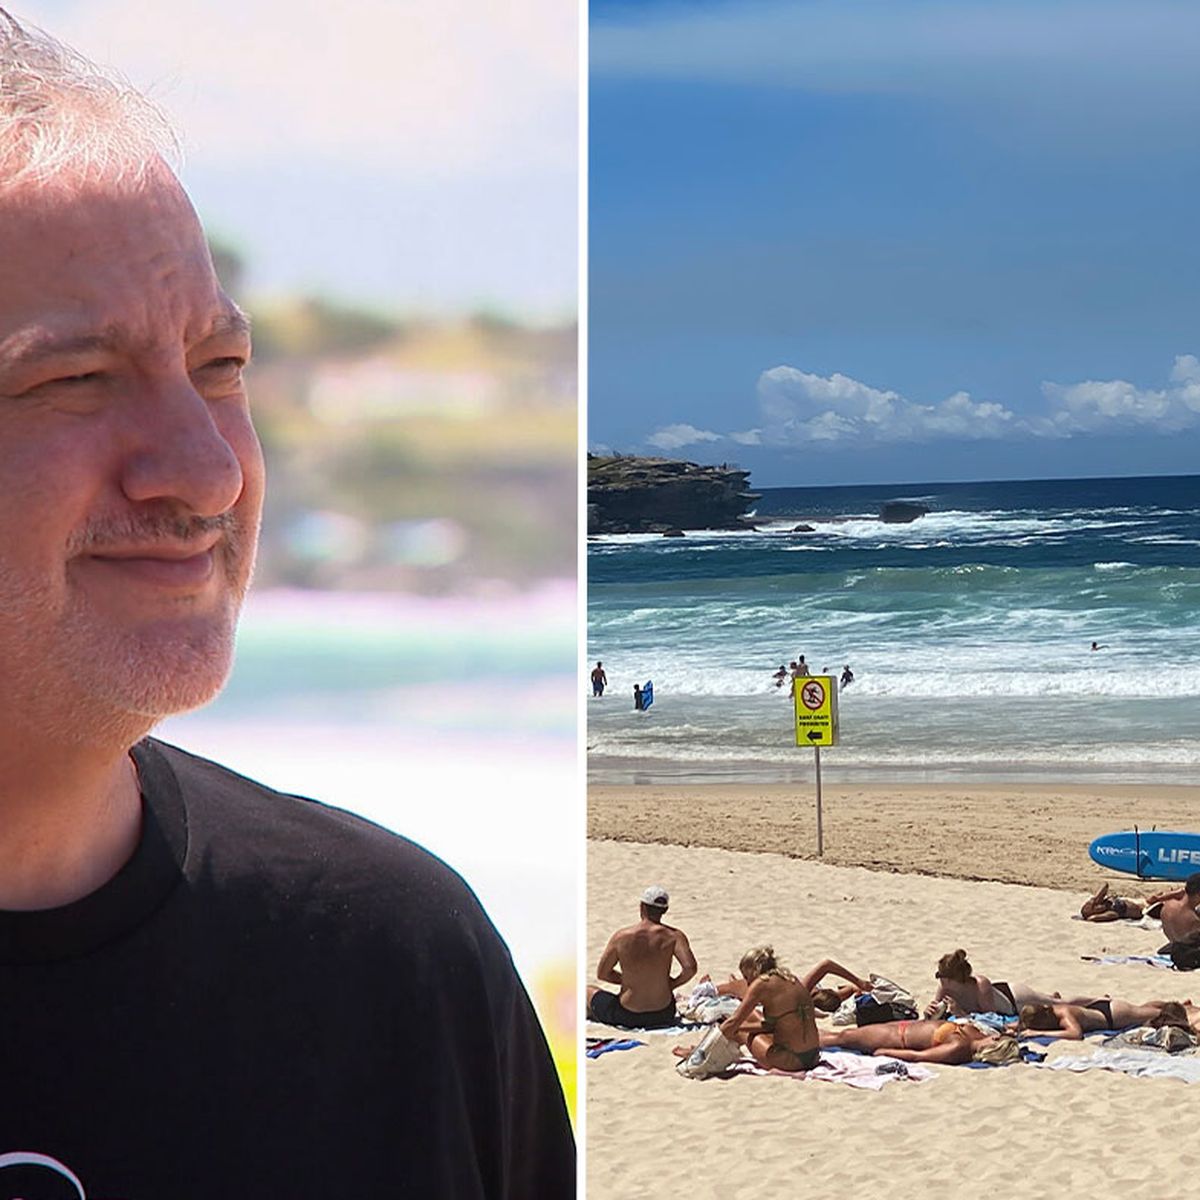 Nudist Beach Experiences - Spencer Tunick: Bondi Beach declared a nude beach for the first time in  history for art installation